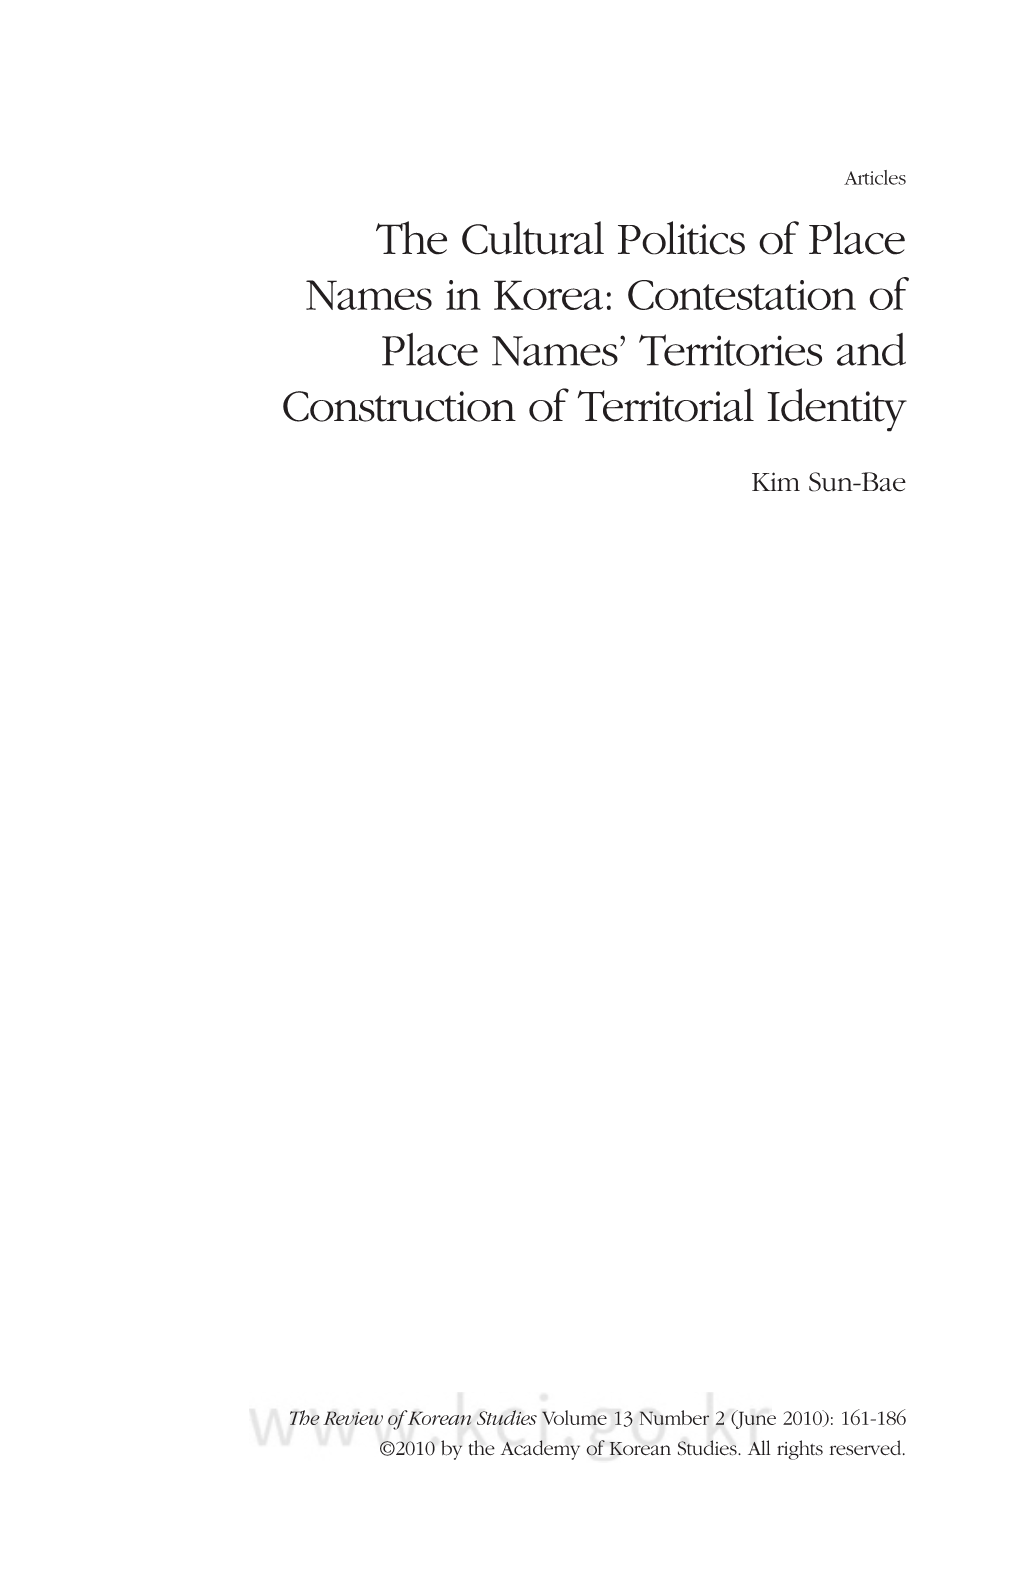 The Cultural Politics of Place Names in Korea: Contestation of Place Names’ Territories and Construction of Territorial Identity